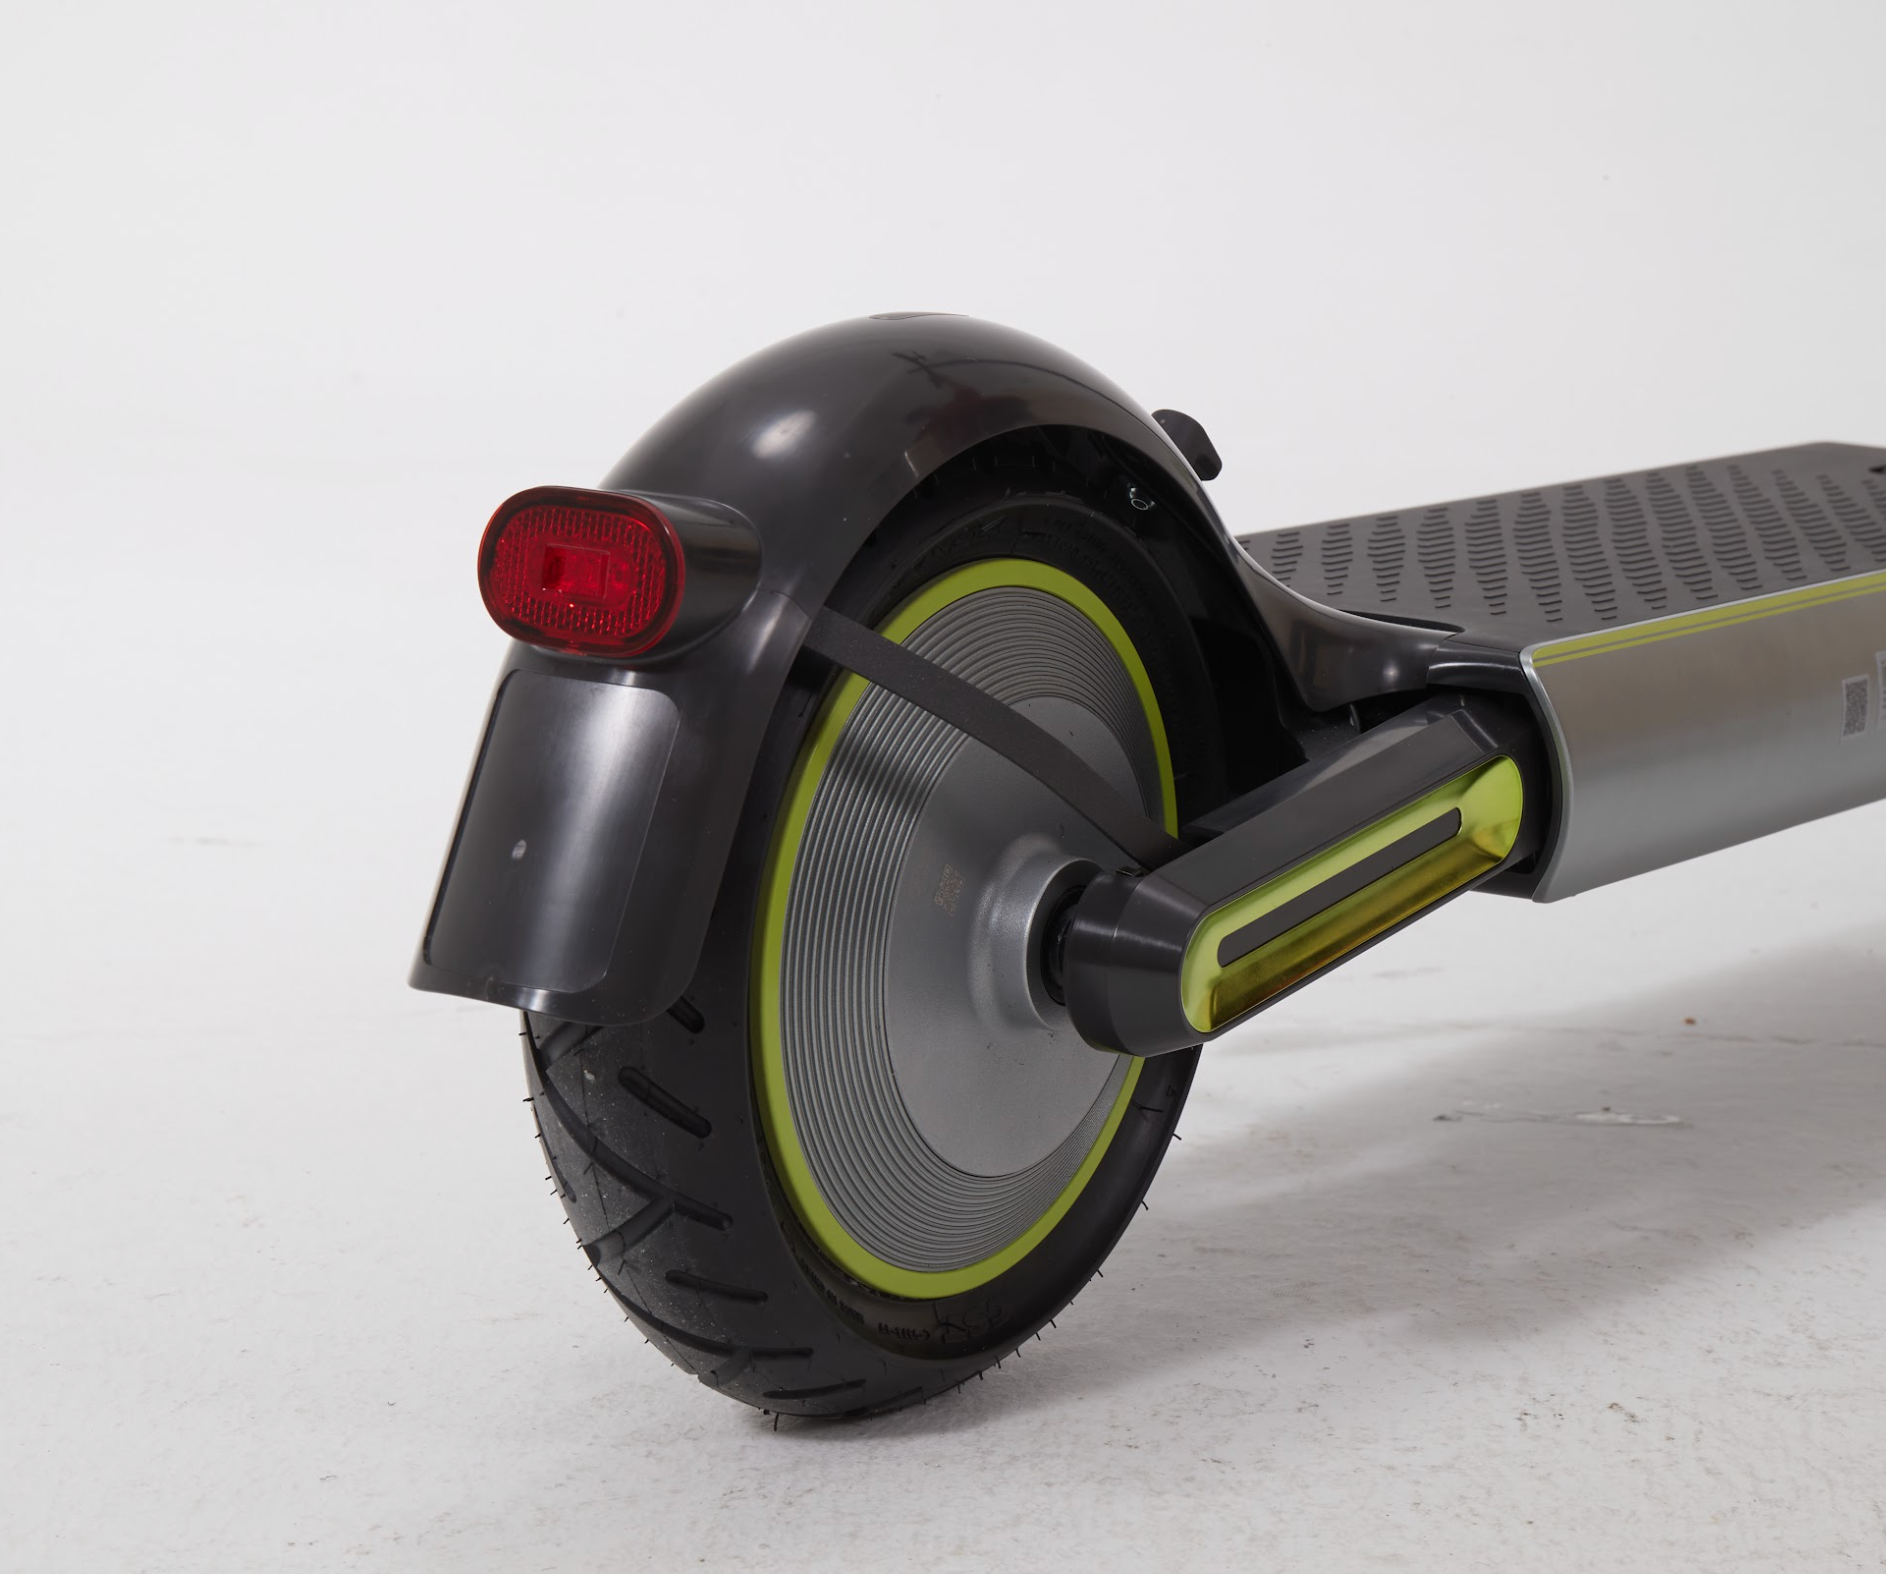 Navee S65 Electric Scooter